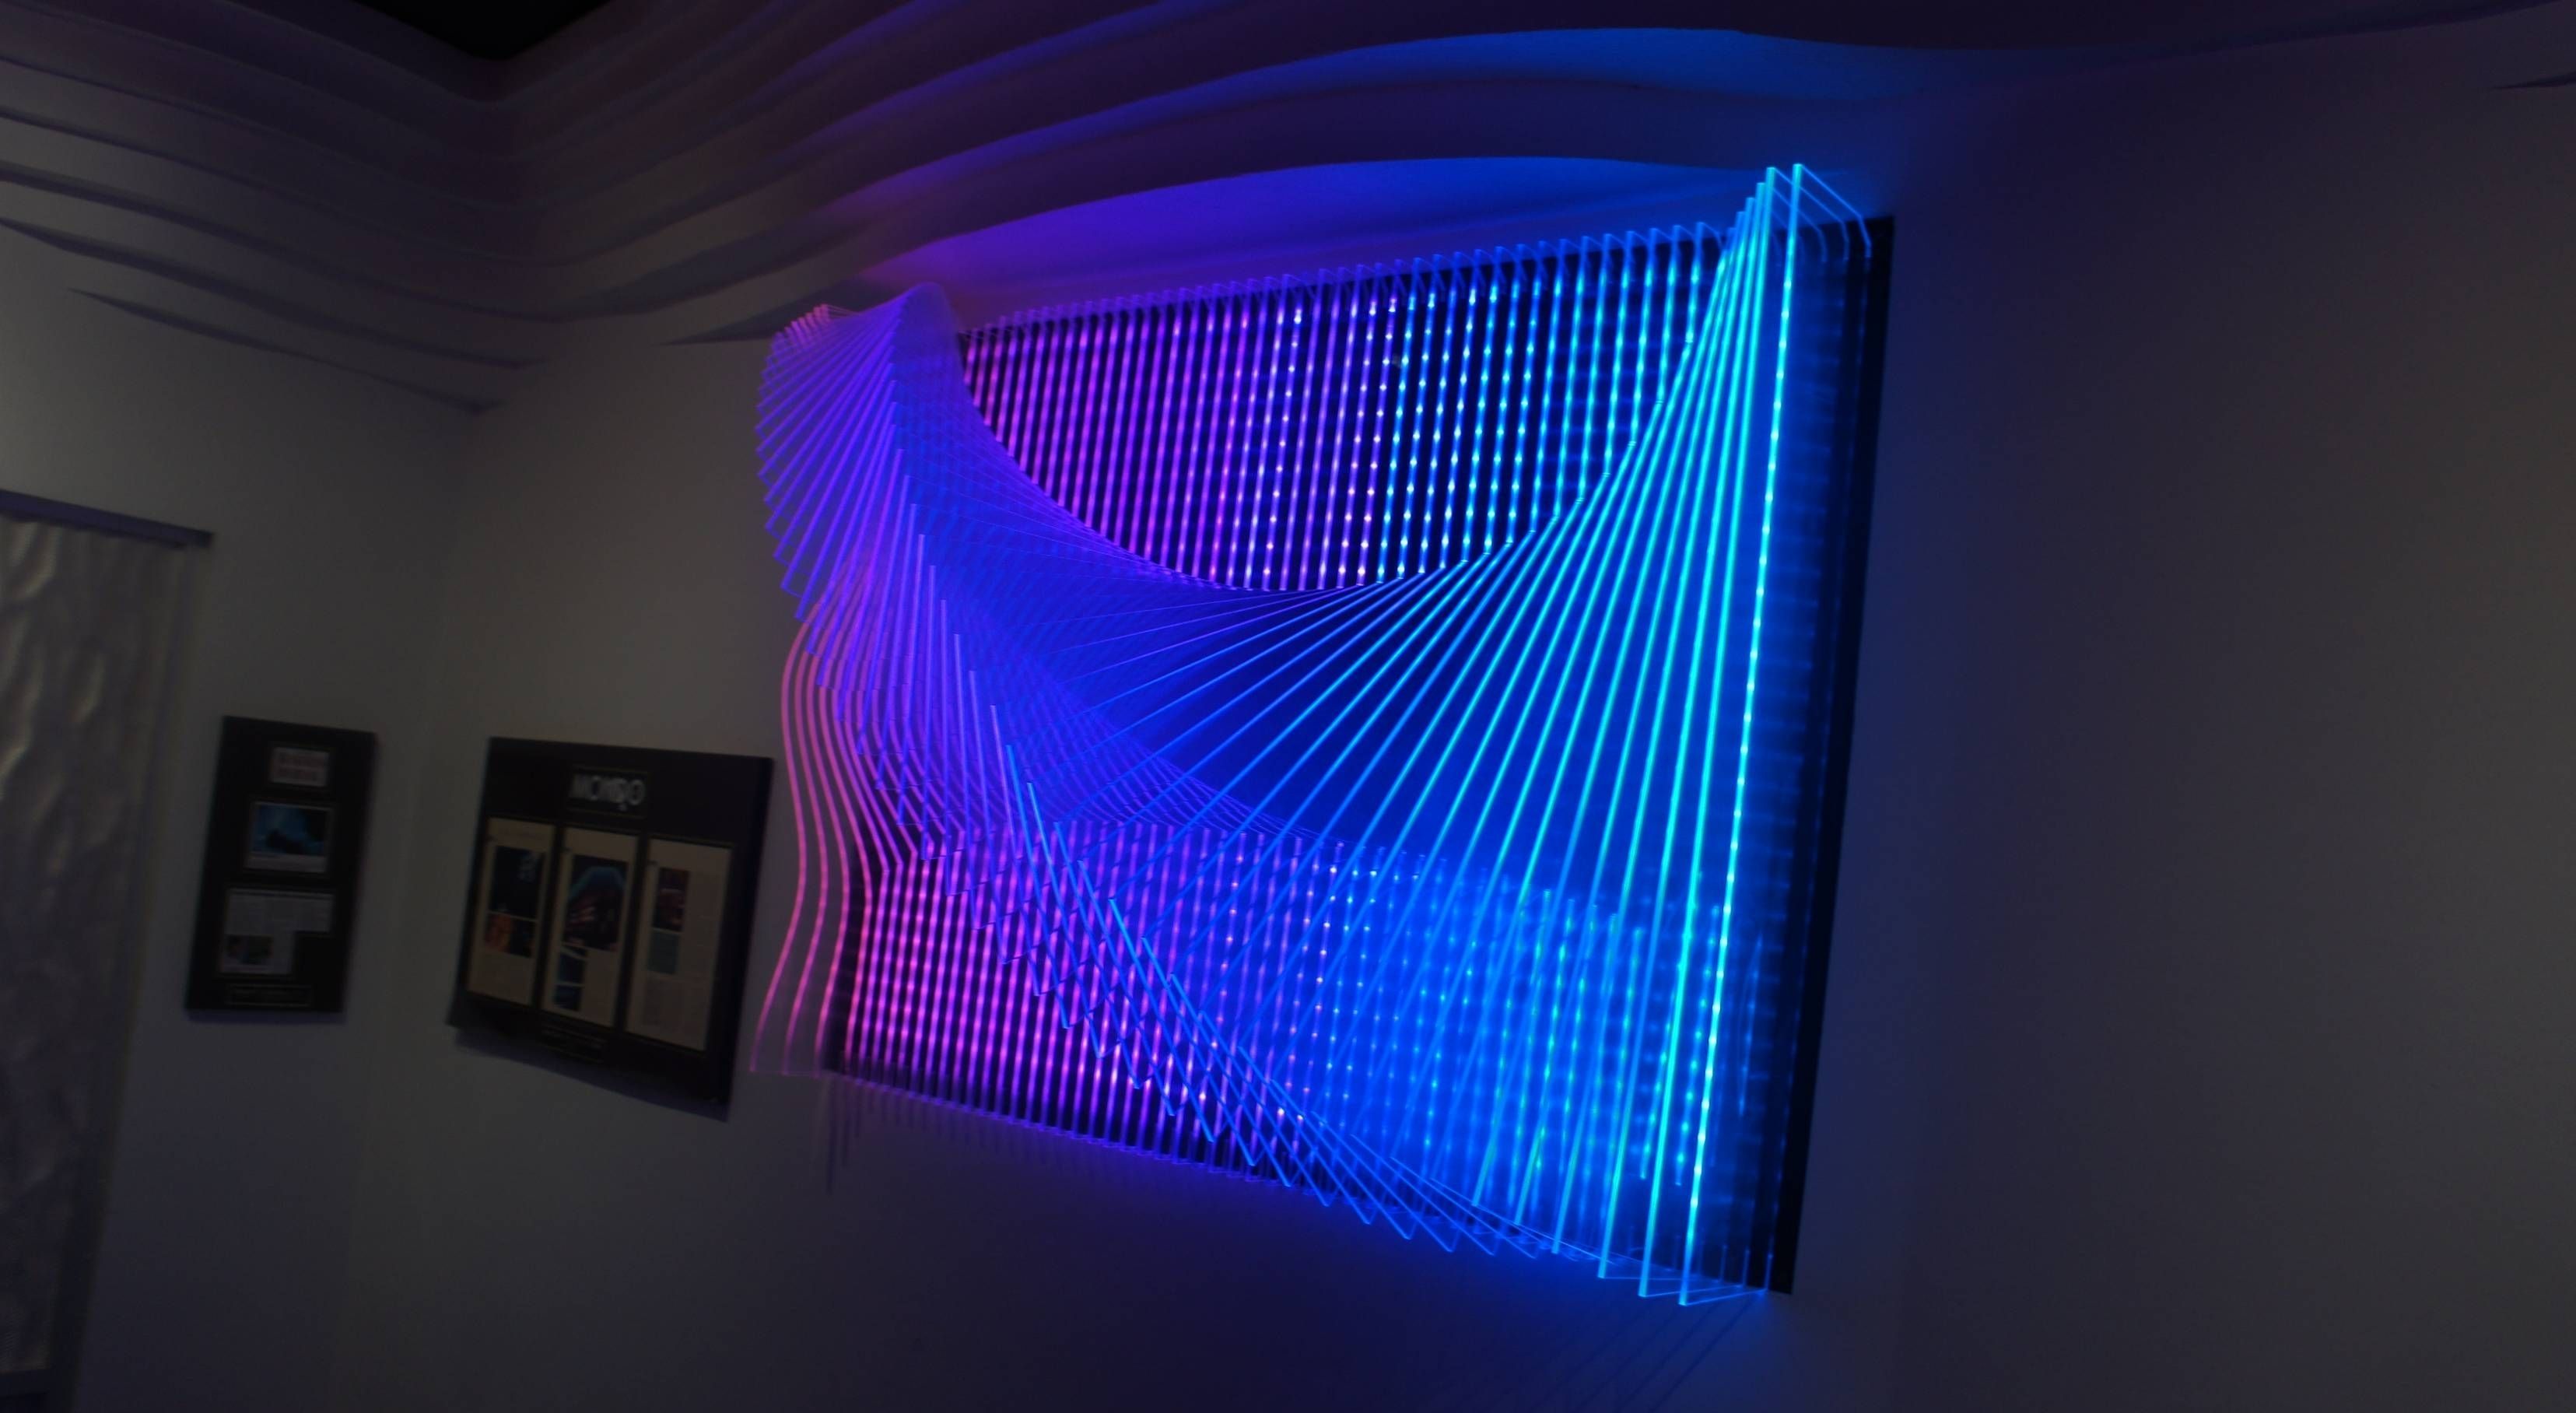 Zspmed Of Led Wall Art Fancy For Your Home Design Ideas With Led Pertaining To Led Wall Art (View 3 of 20)